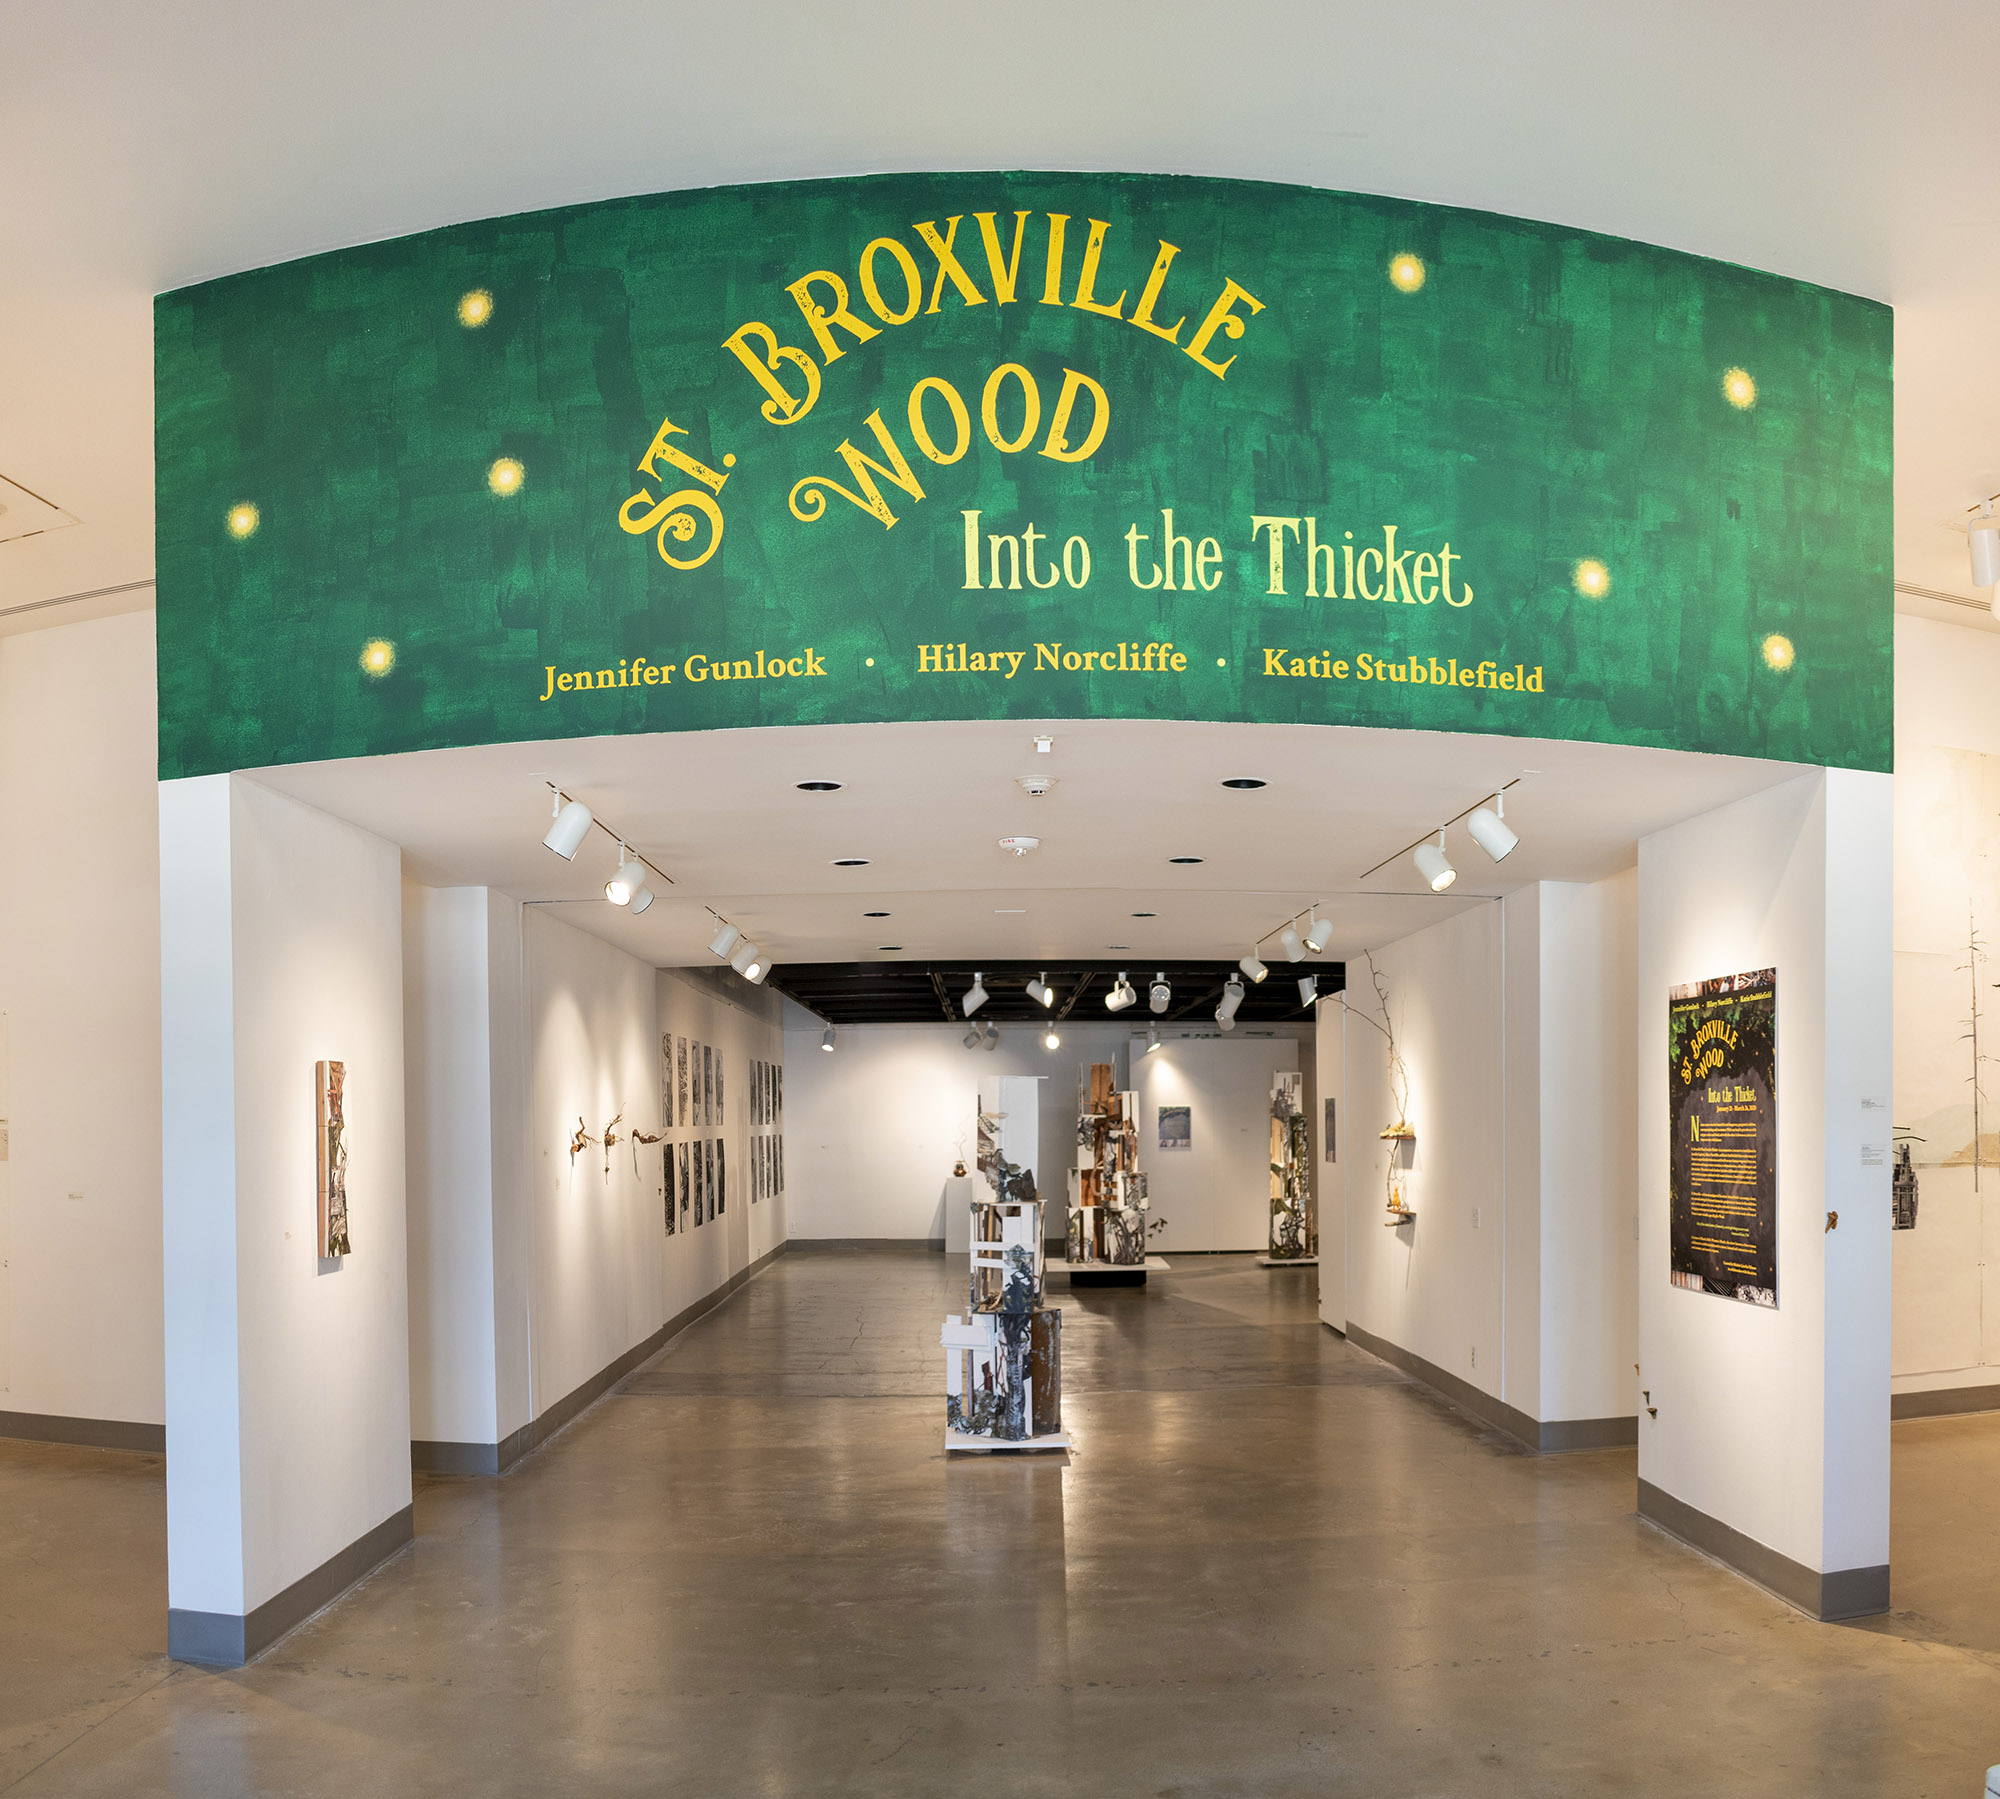 Installation View, Title Wall, "St. Broxville Wood: Into the Thicket" Exhibition, Artists: Jennifer Gunlock, Hilary Norcliffe, and Katie Stubblefield. Jan. 21, 2020 extended through Dec. 13, 2020 (extended indefinitely after Dec. 13, 2020)